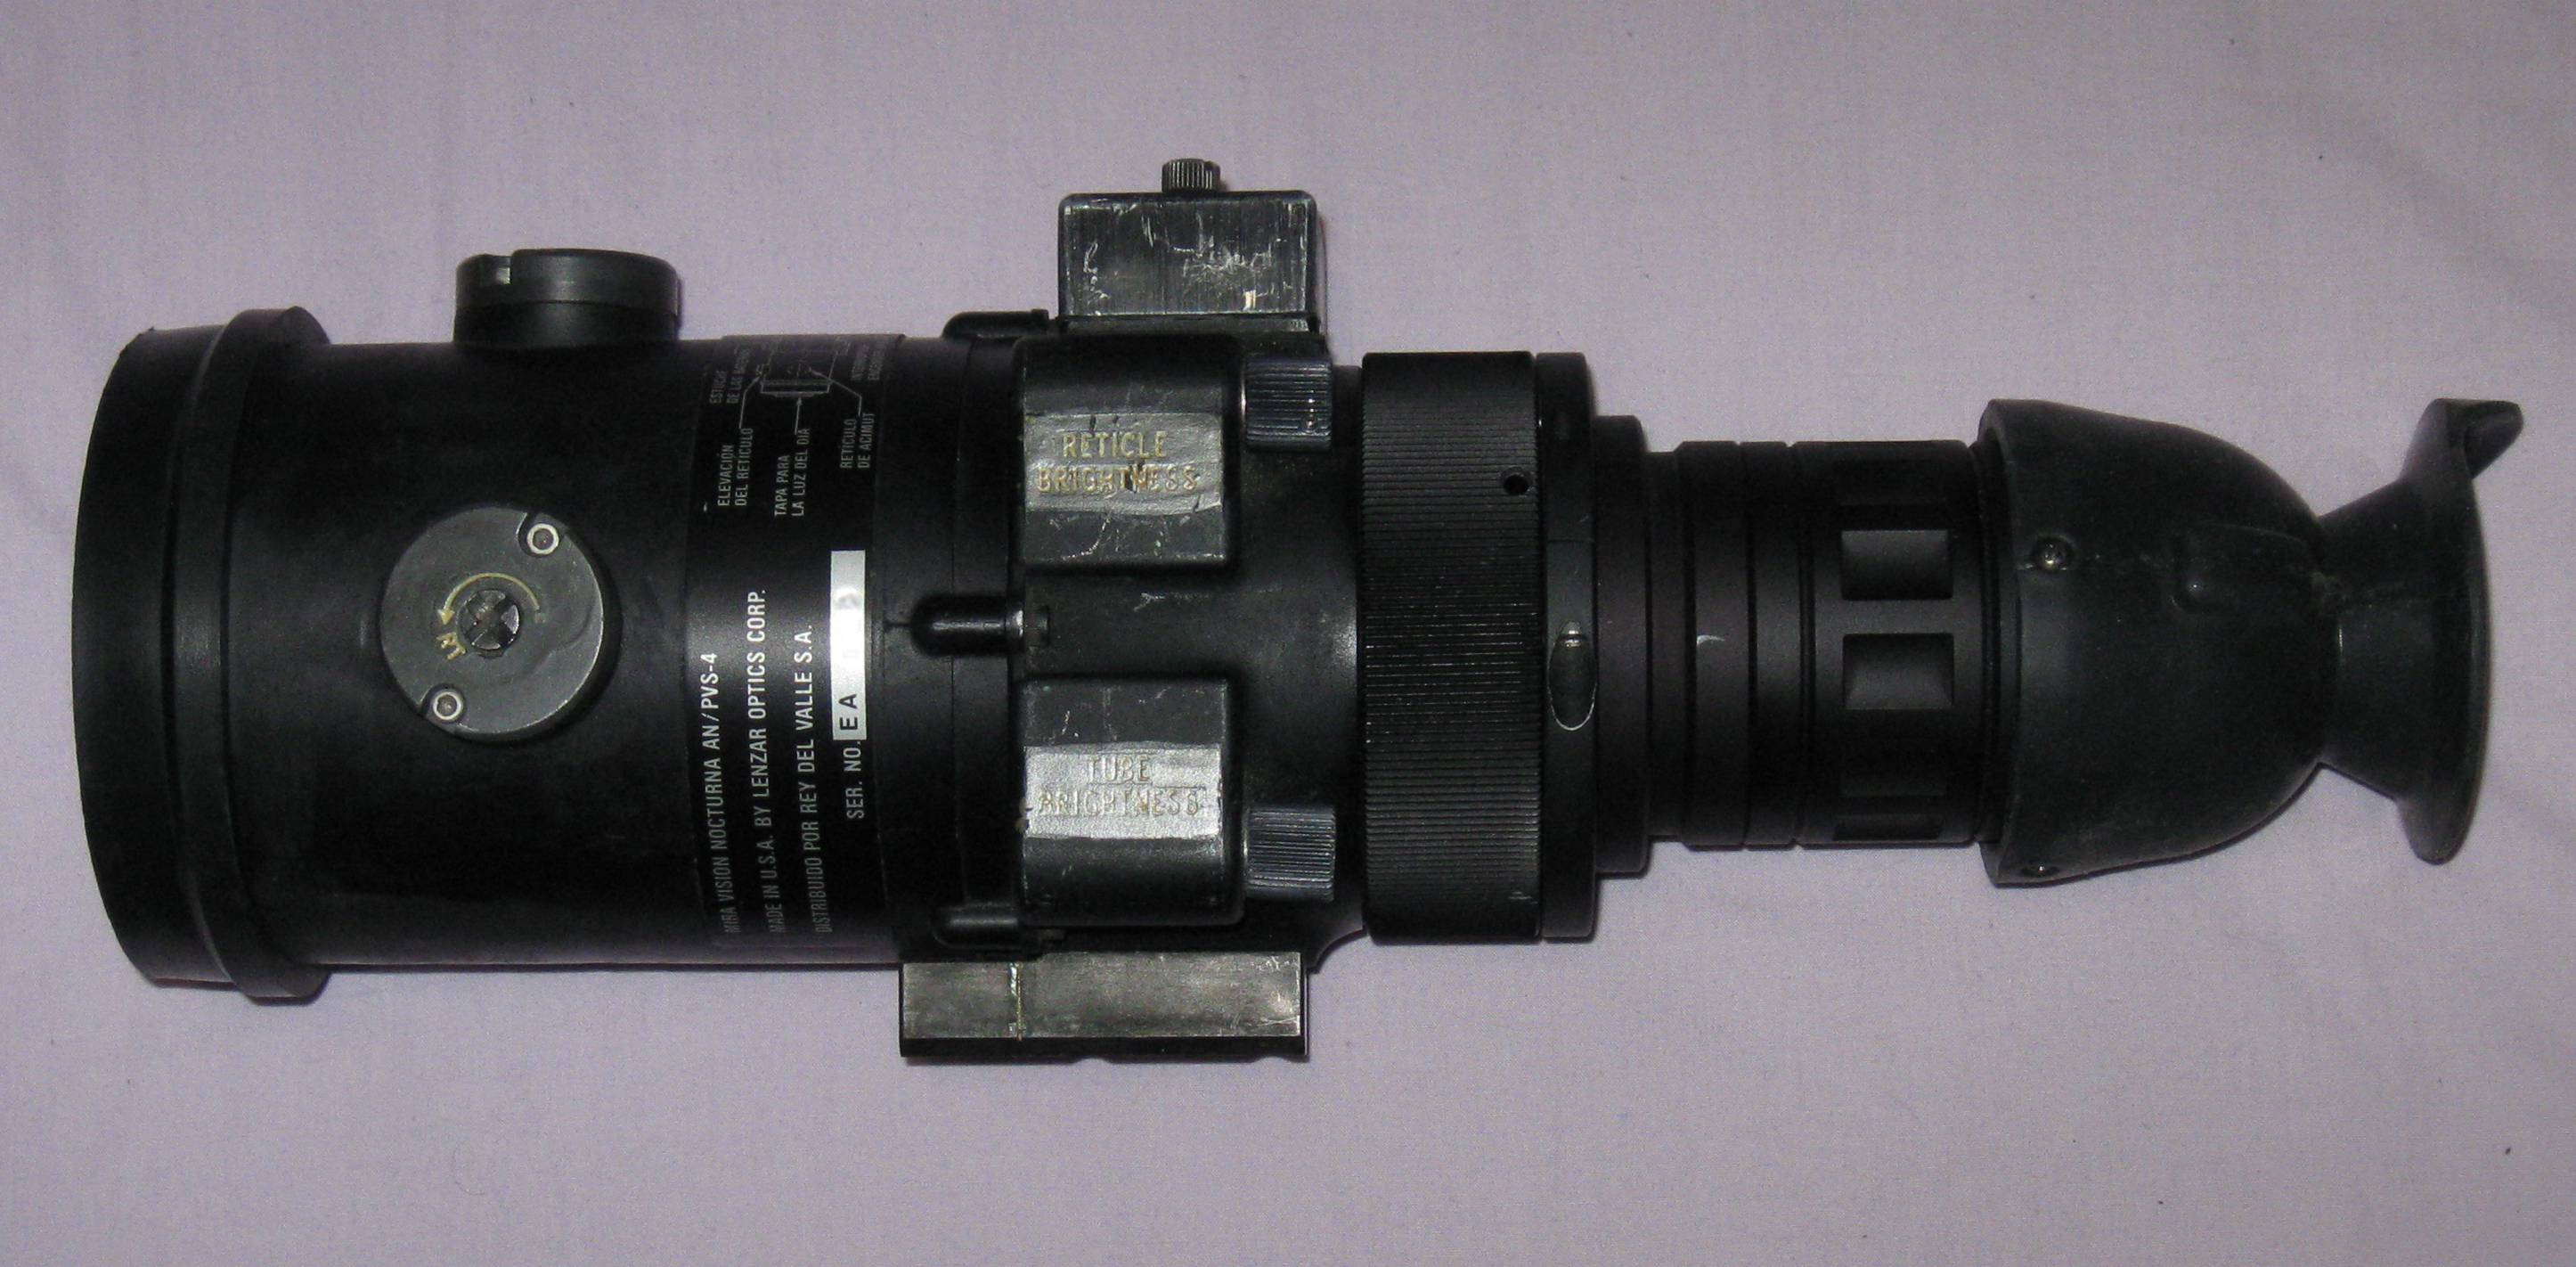 Starlight technology for night vision scopes - what it is and how